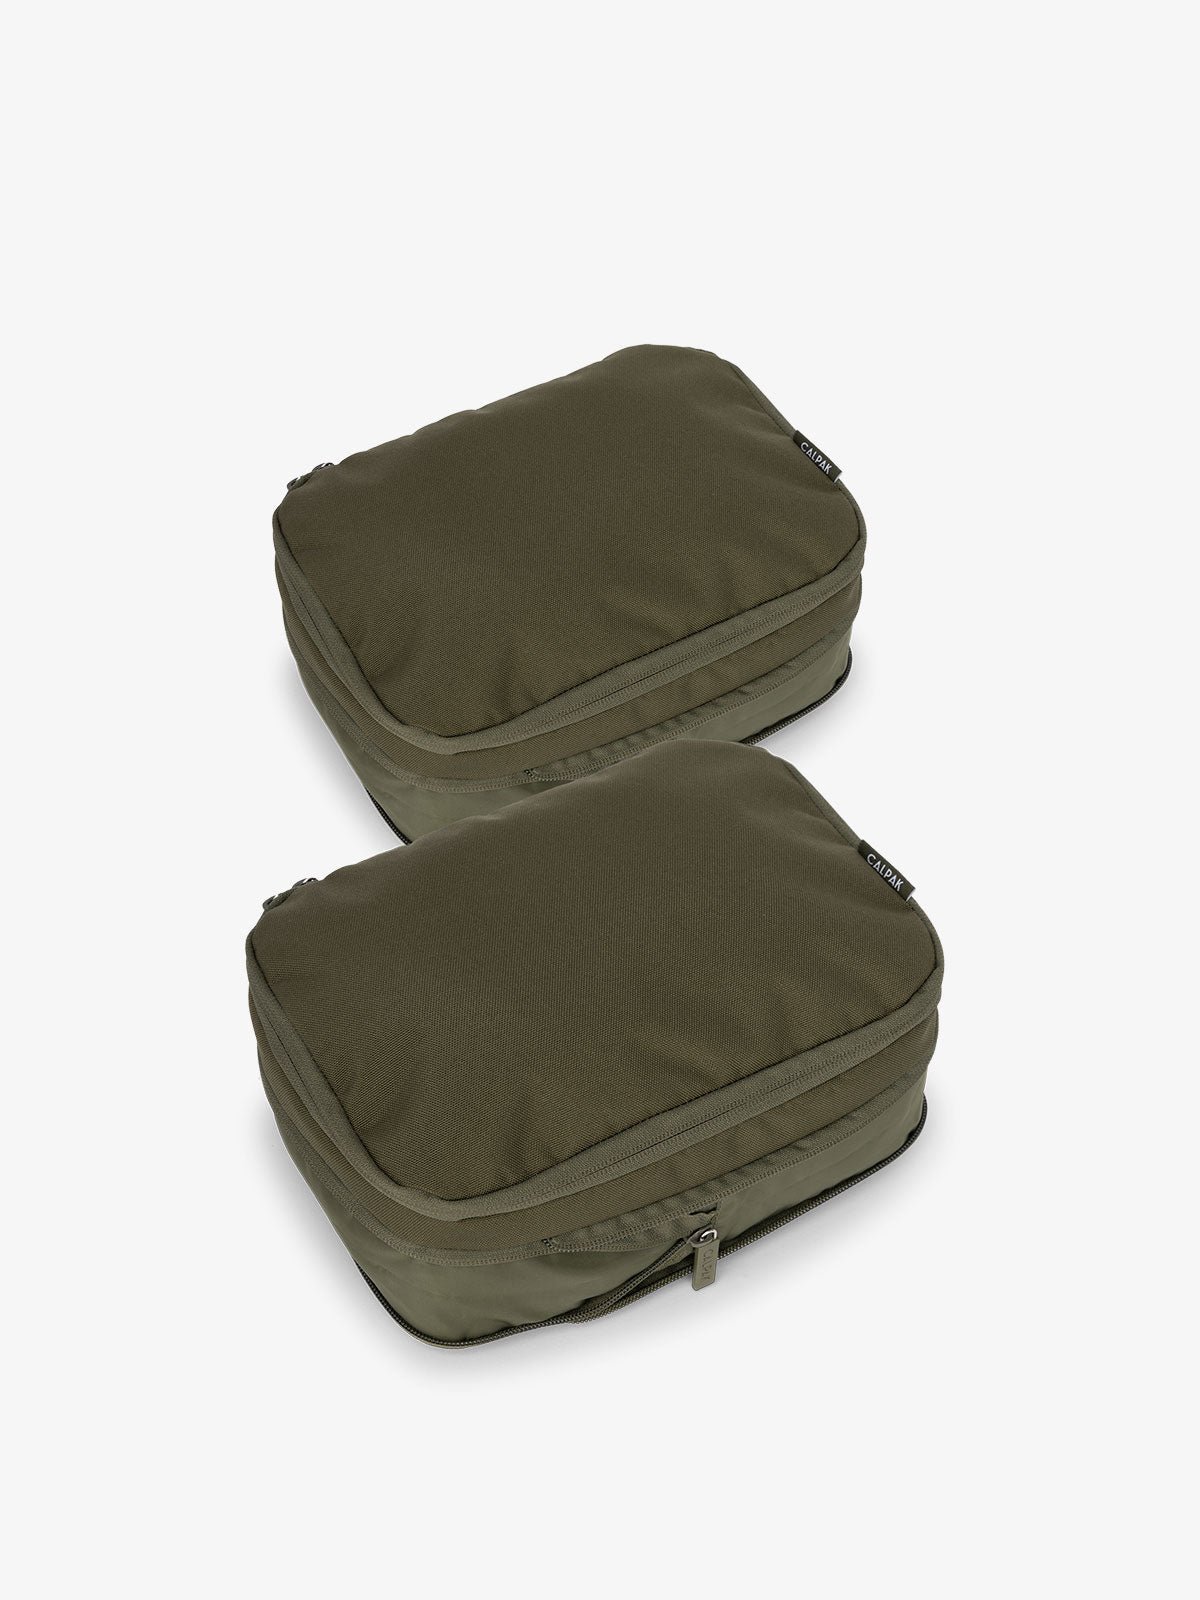 CALPAK small compression packing cubes with top handles and expandable by 4.5 inches in green